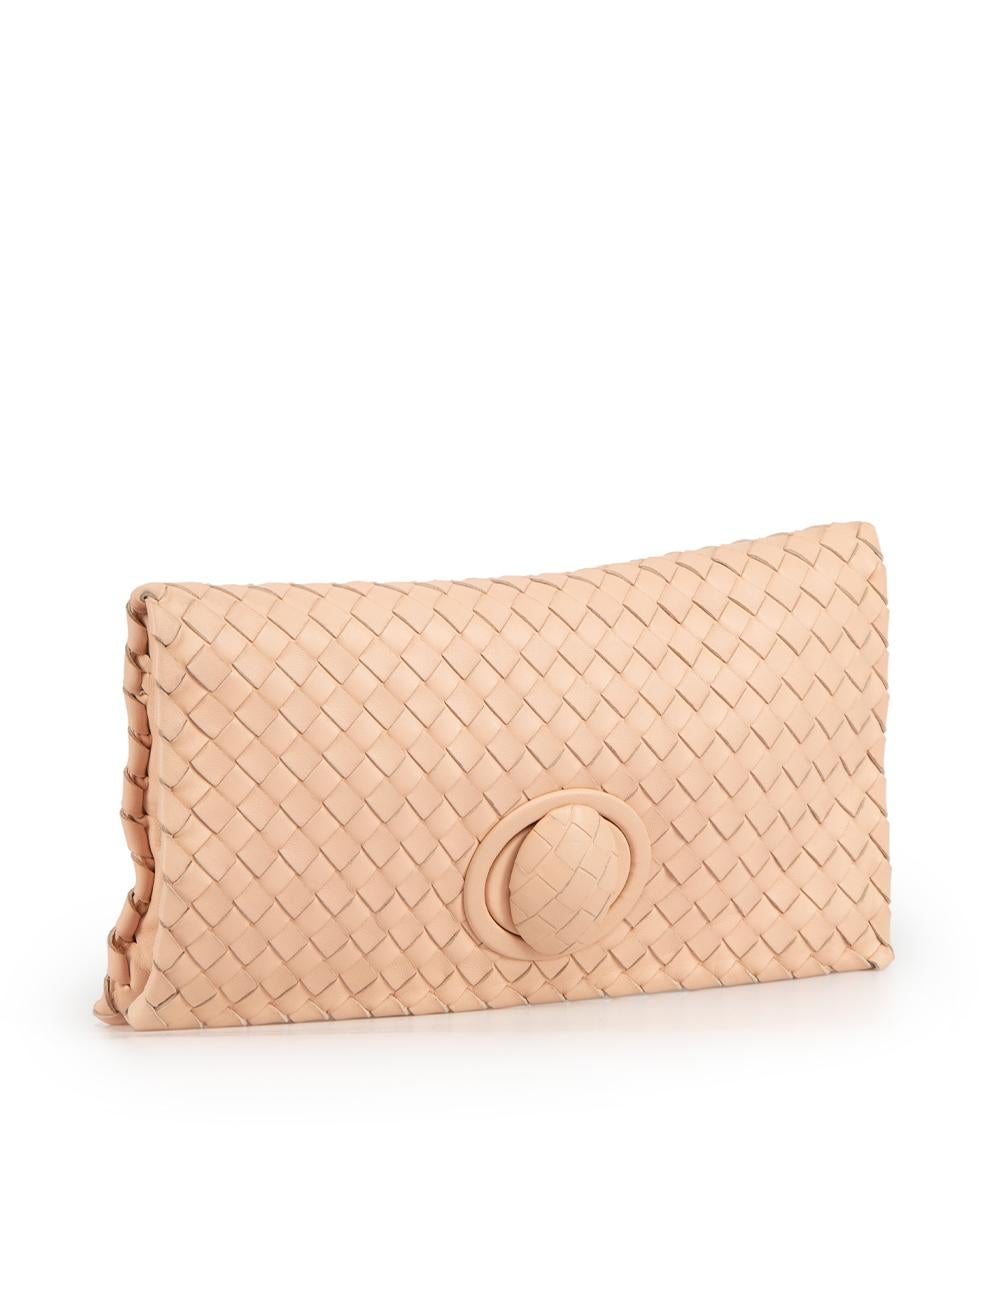 CONDITION is Very good. Minimal wear to clutch is evident. Minimal wear to the overall colour of the bag with darkening of the leather on this used Bottega Veneta designer resale item.
 
Details
Pink 
Leather 
Medium clutch bag 
Intrecciato weave